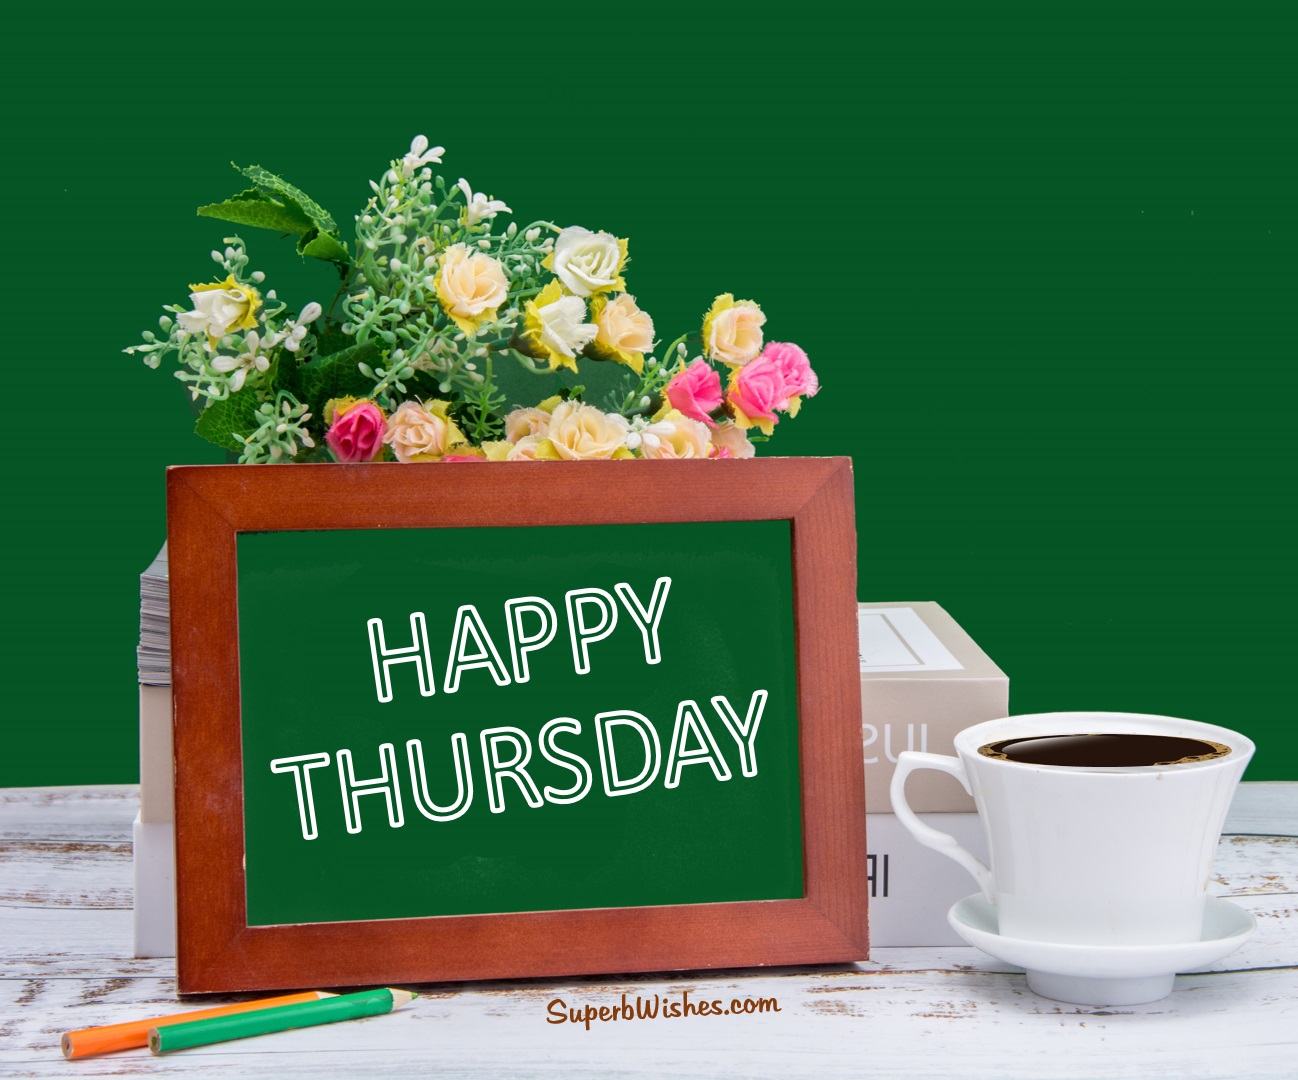 Happy Thursday With A Cup of Coffee Image | SuperbWishes.com